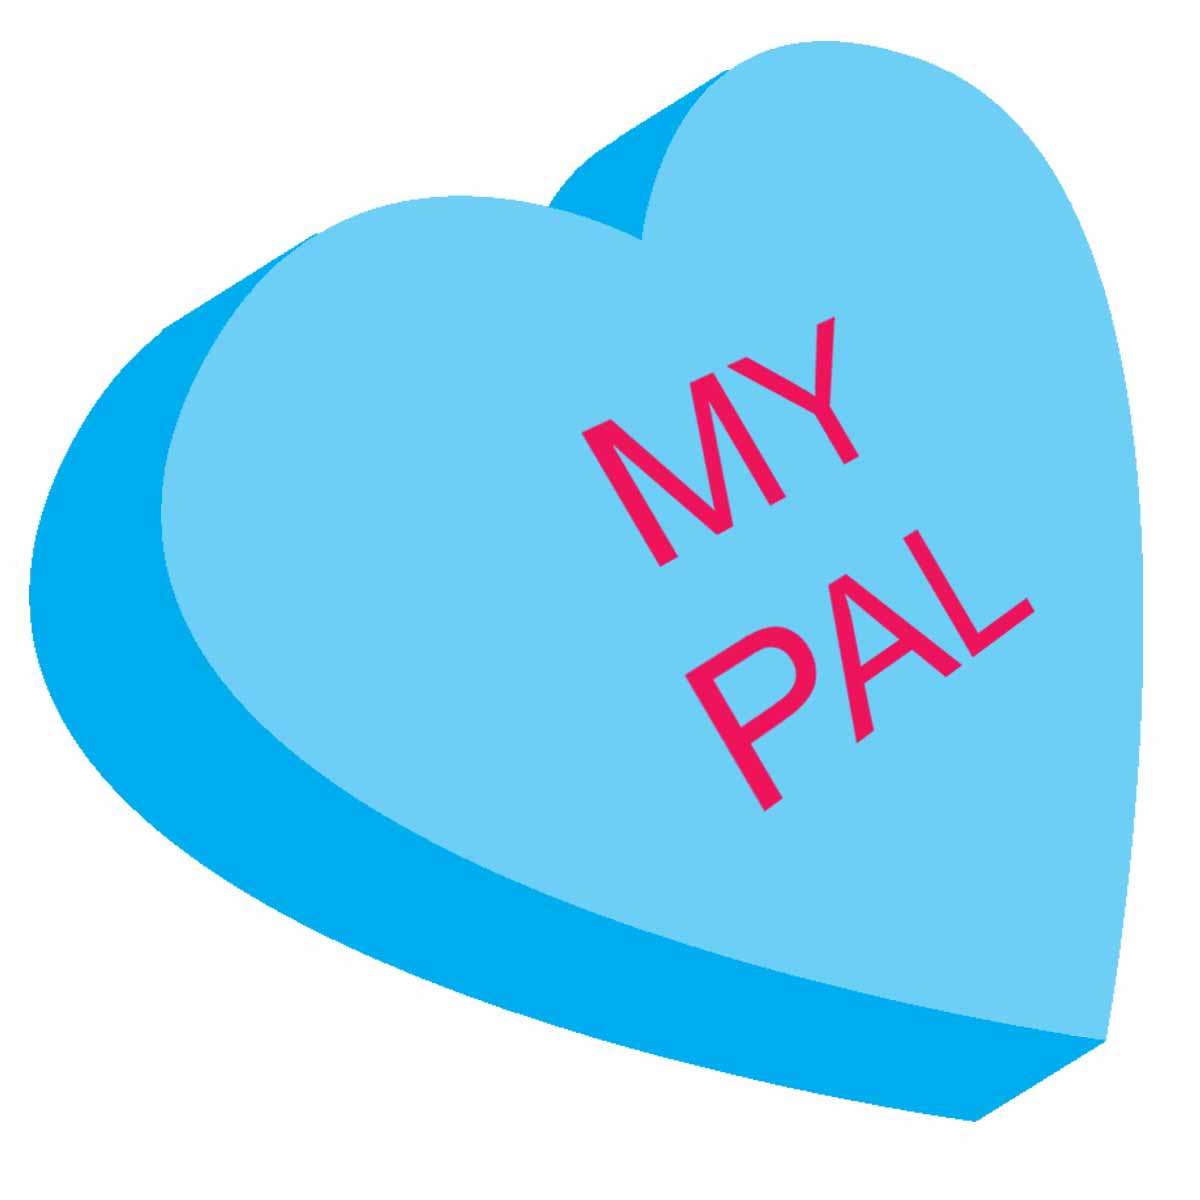 Valentines Hearts - ClipArt Best